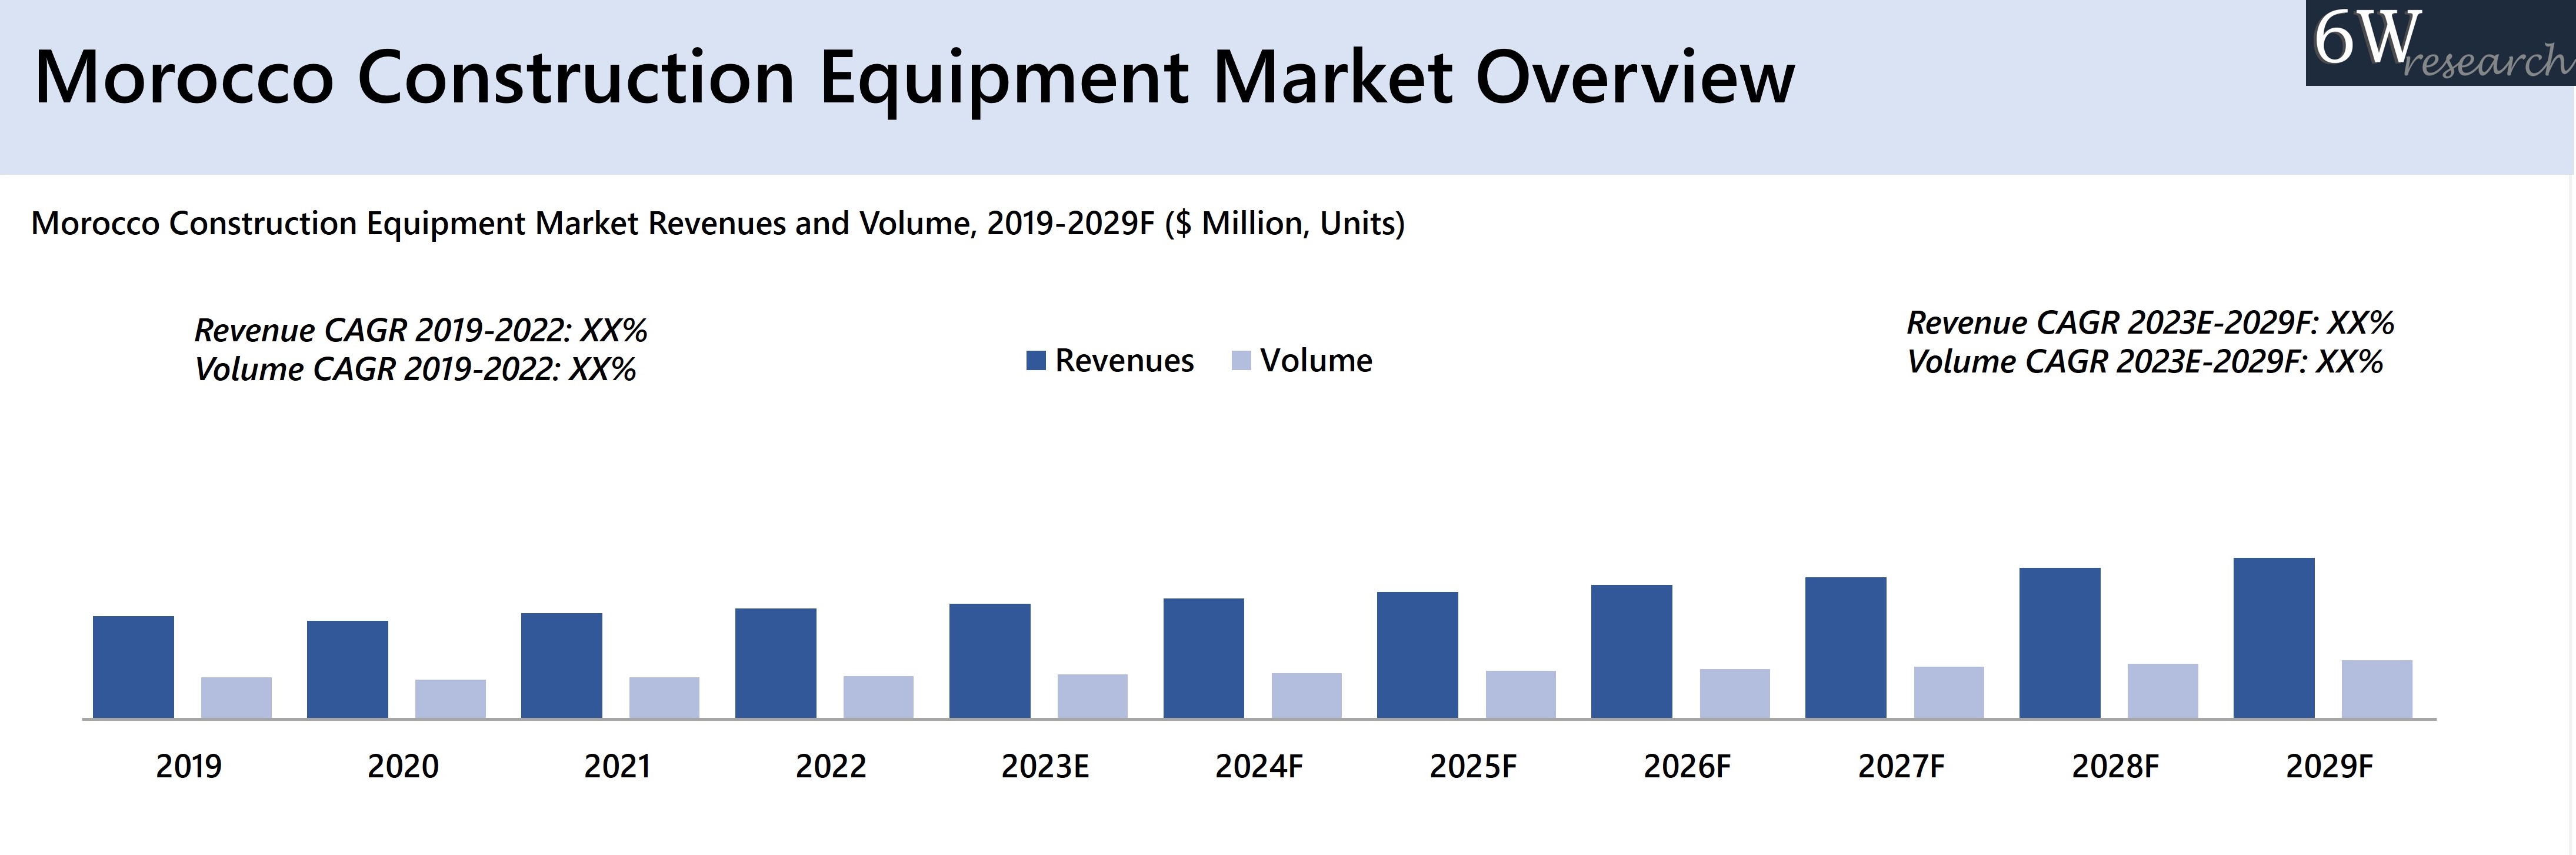 Morocco Construction Equipment Market Overview